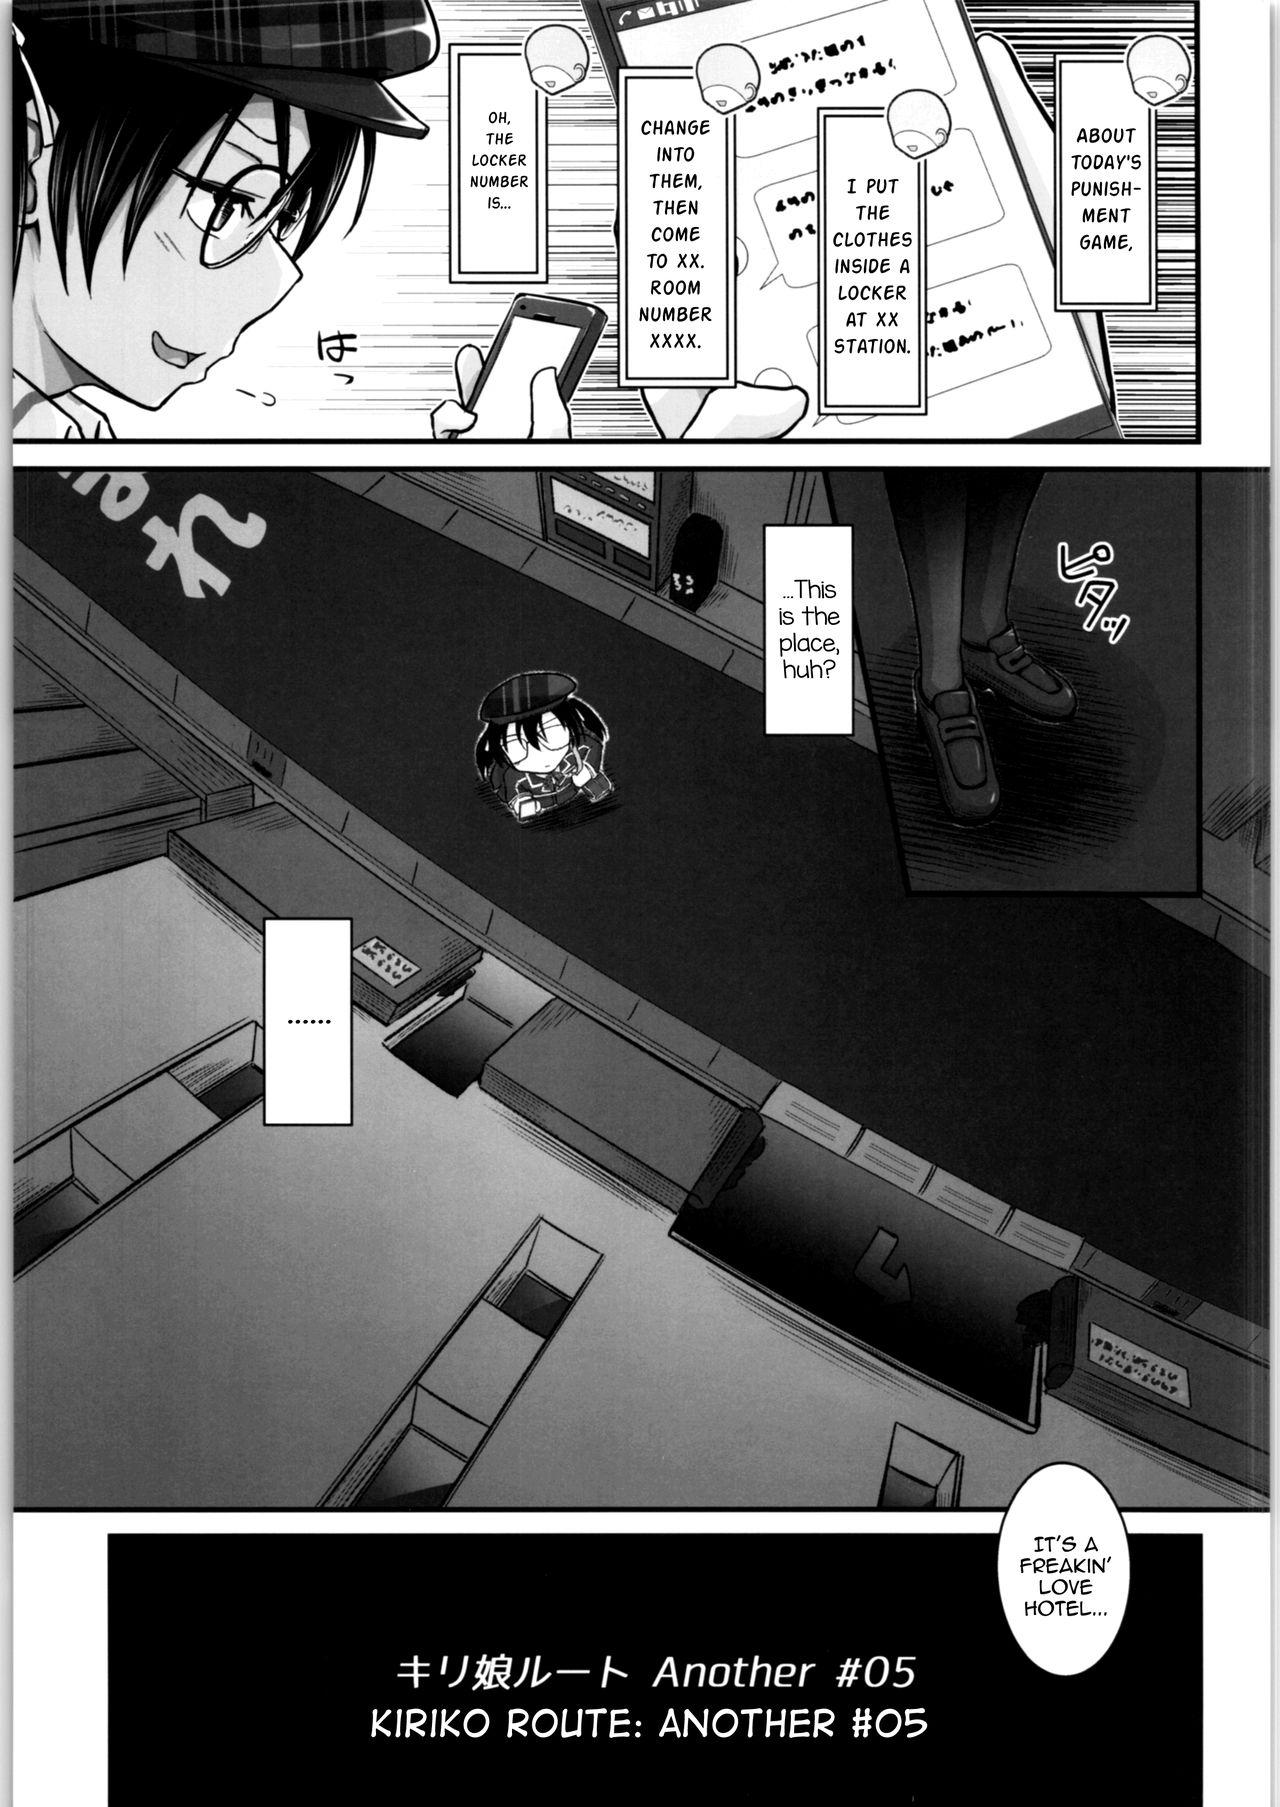 Watersports Kiriko Route Another #05 - Sword art online Wives - Page 4